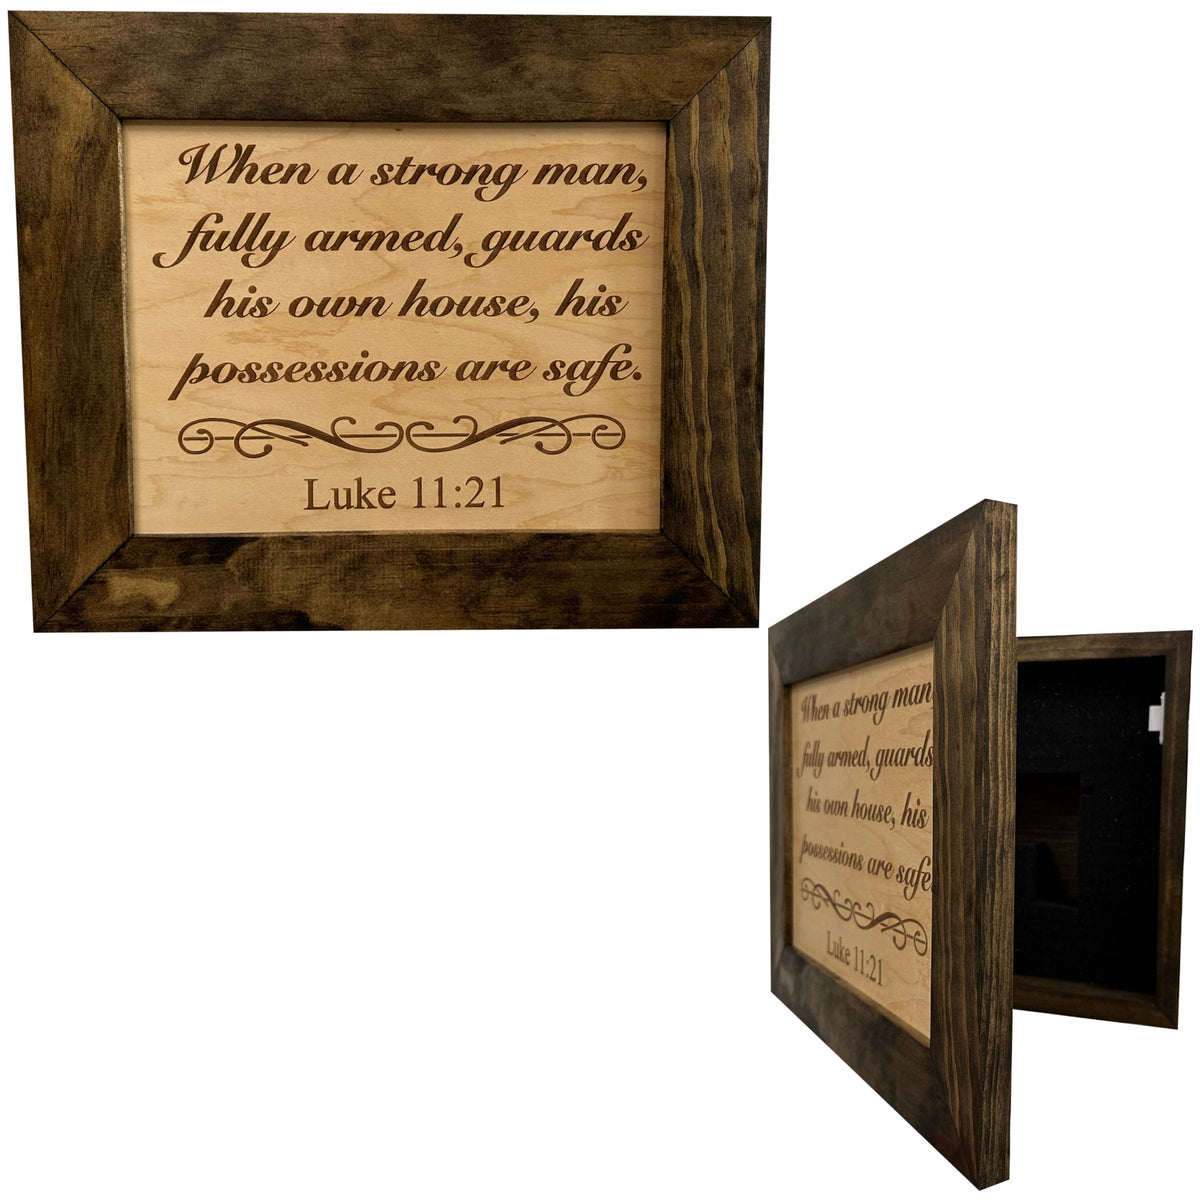 Hidden Gun Safe Recessed In Wall With Luke 11:21 Bible Verse Decoration - Recess In The Wall or Mount On The Wall by Bellewood Designs